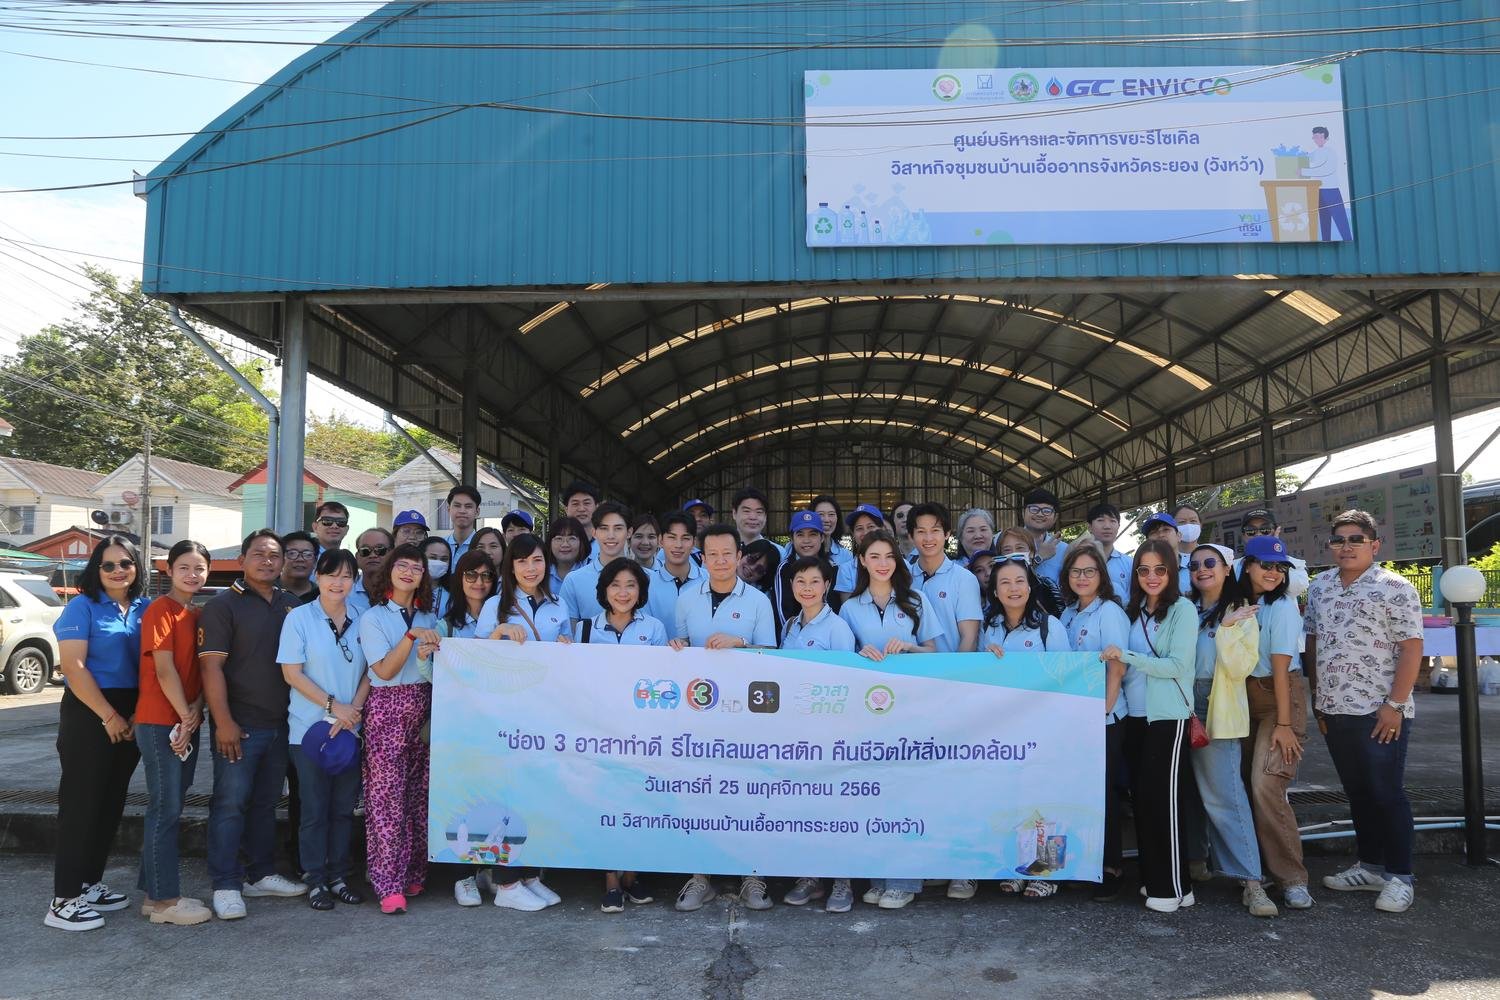 Channel 3 Volunteers Visit the Community-based Waste Management Model in “Channel 3 Staff Voluntary Project: Plastic recycling to retrieve environment” in Rayong